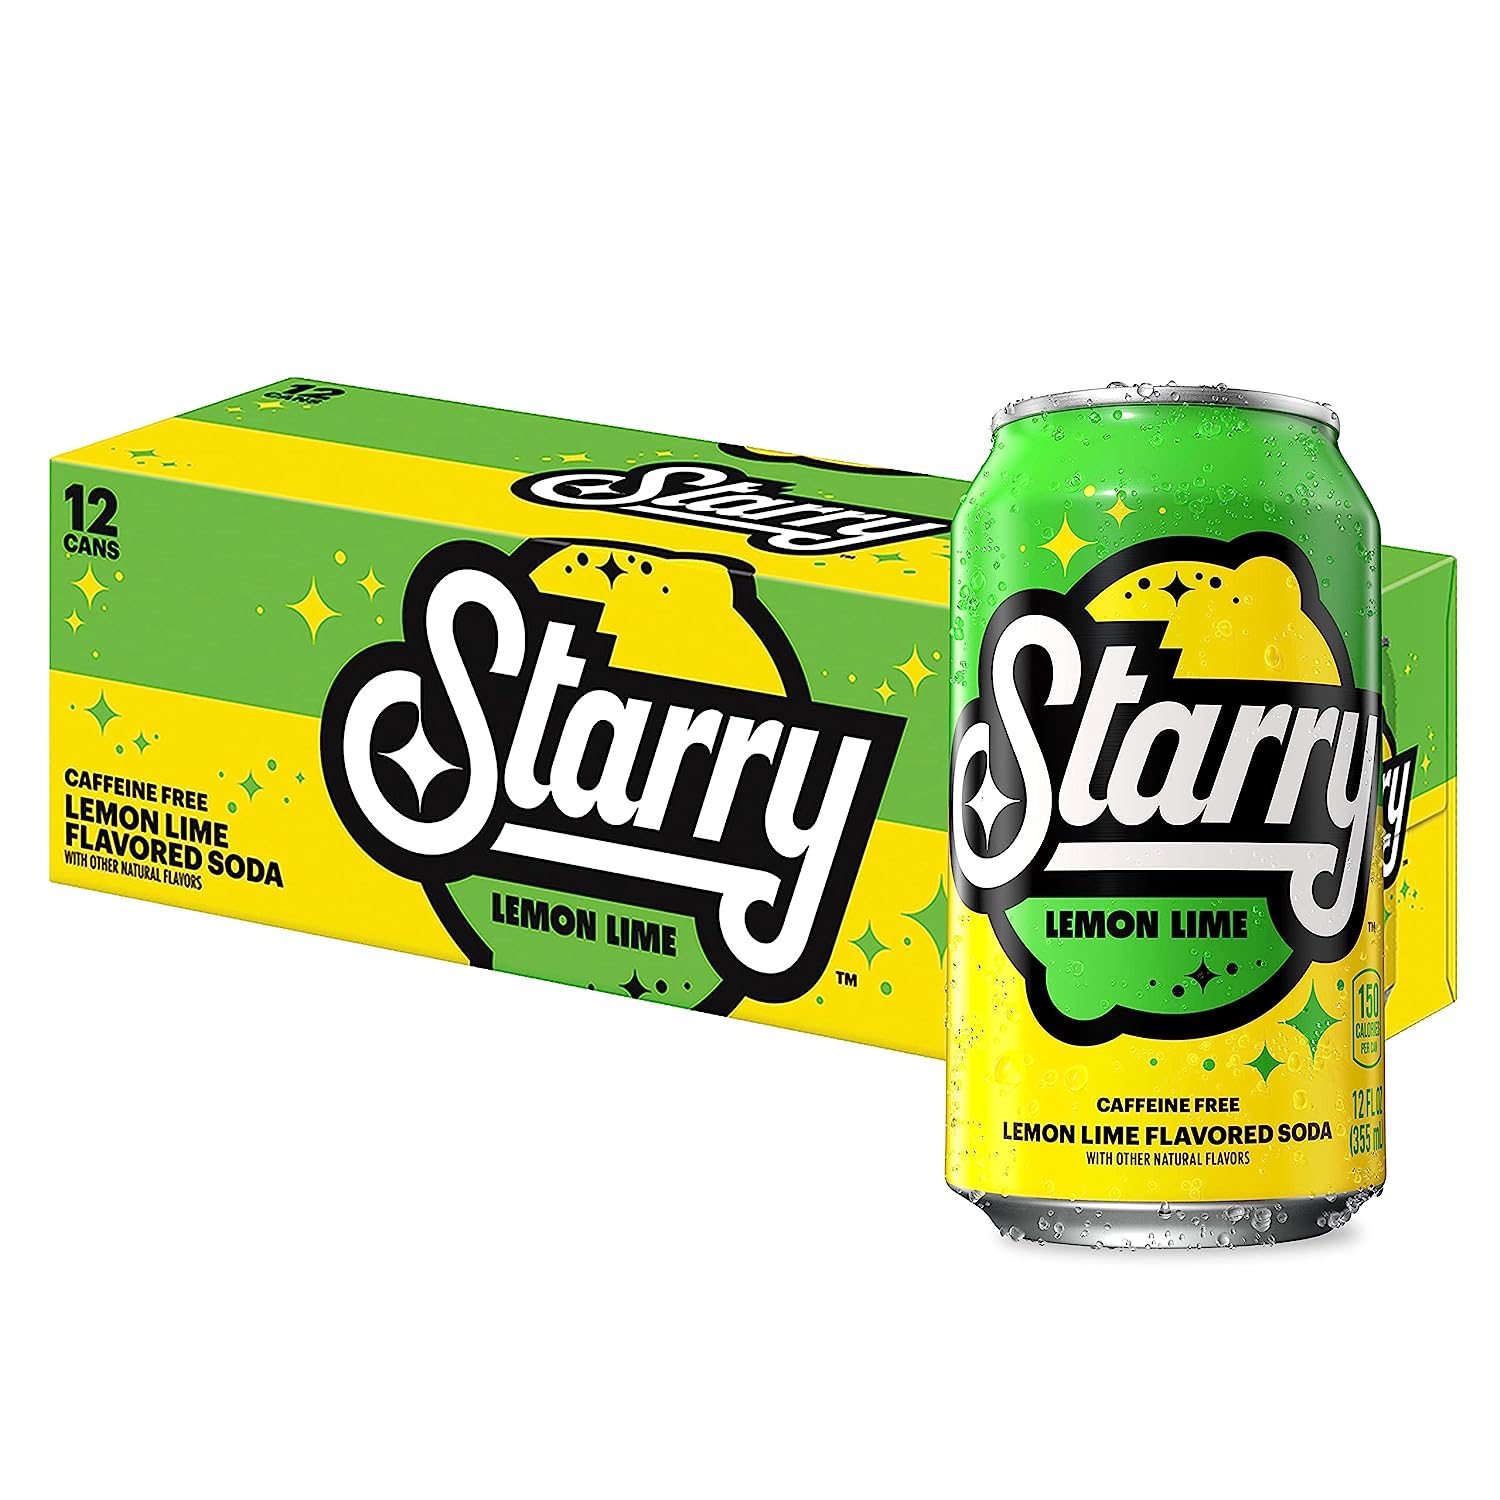 Starry Soda: Sparkling Stars in Every Sip